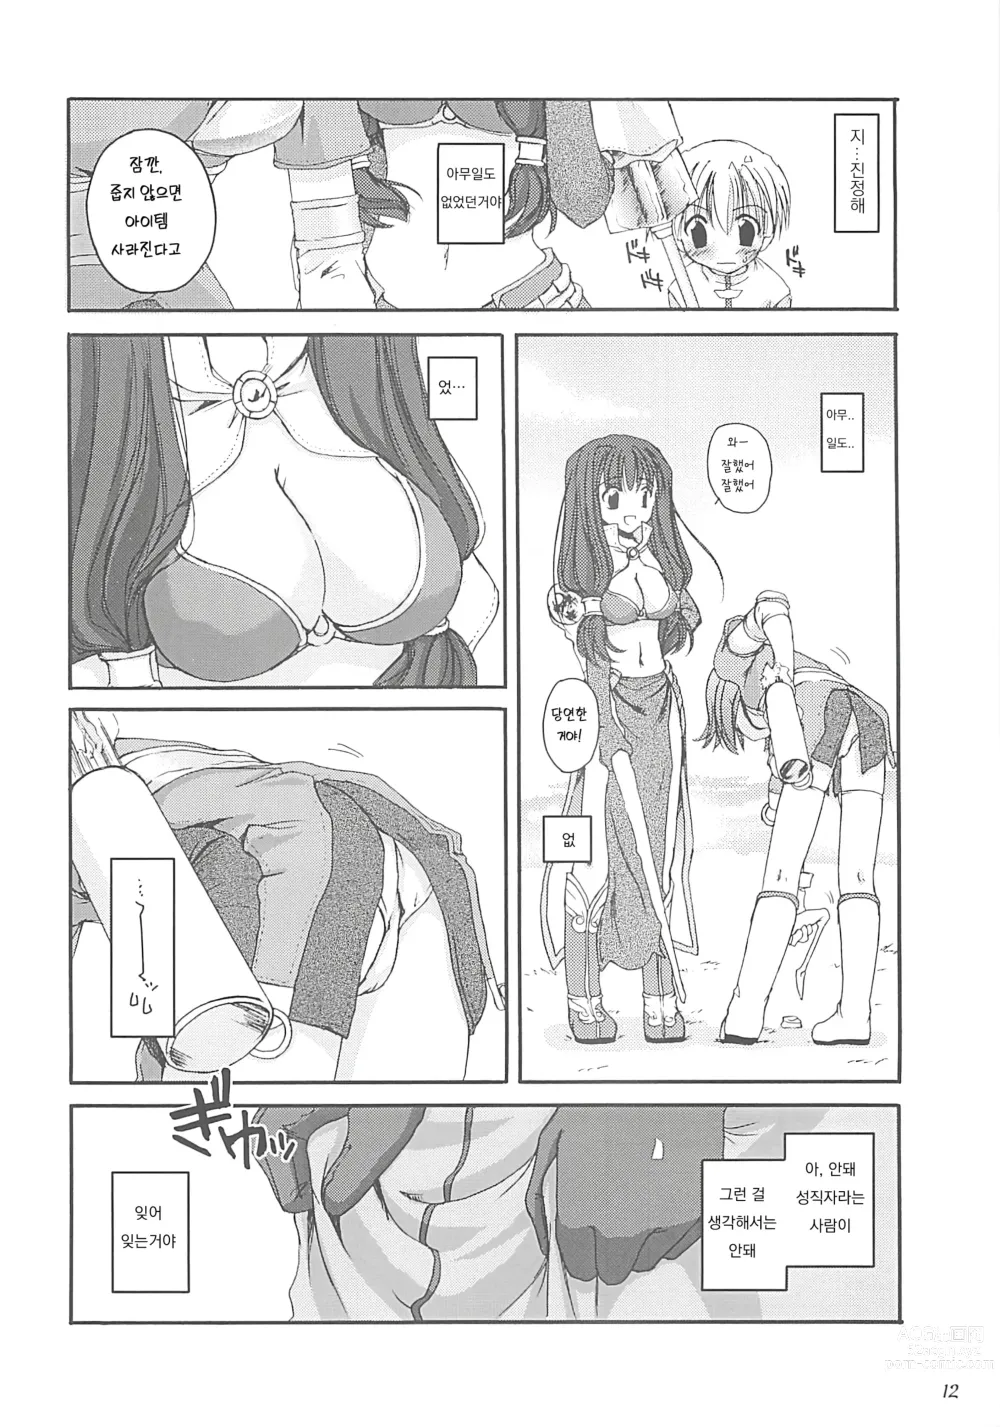 Page 11 of doujinshi D.L. Action 13